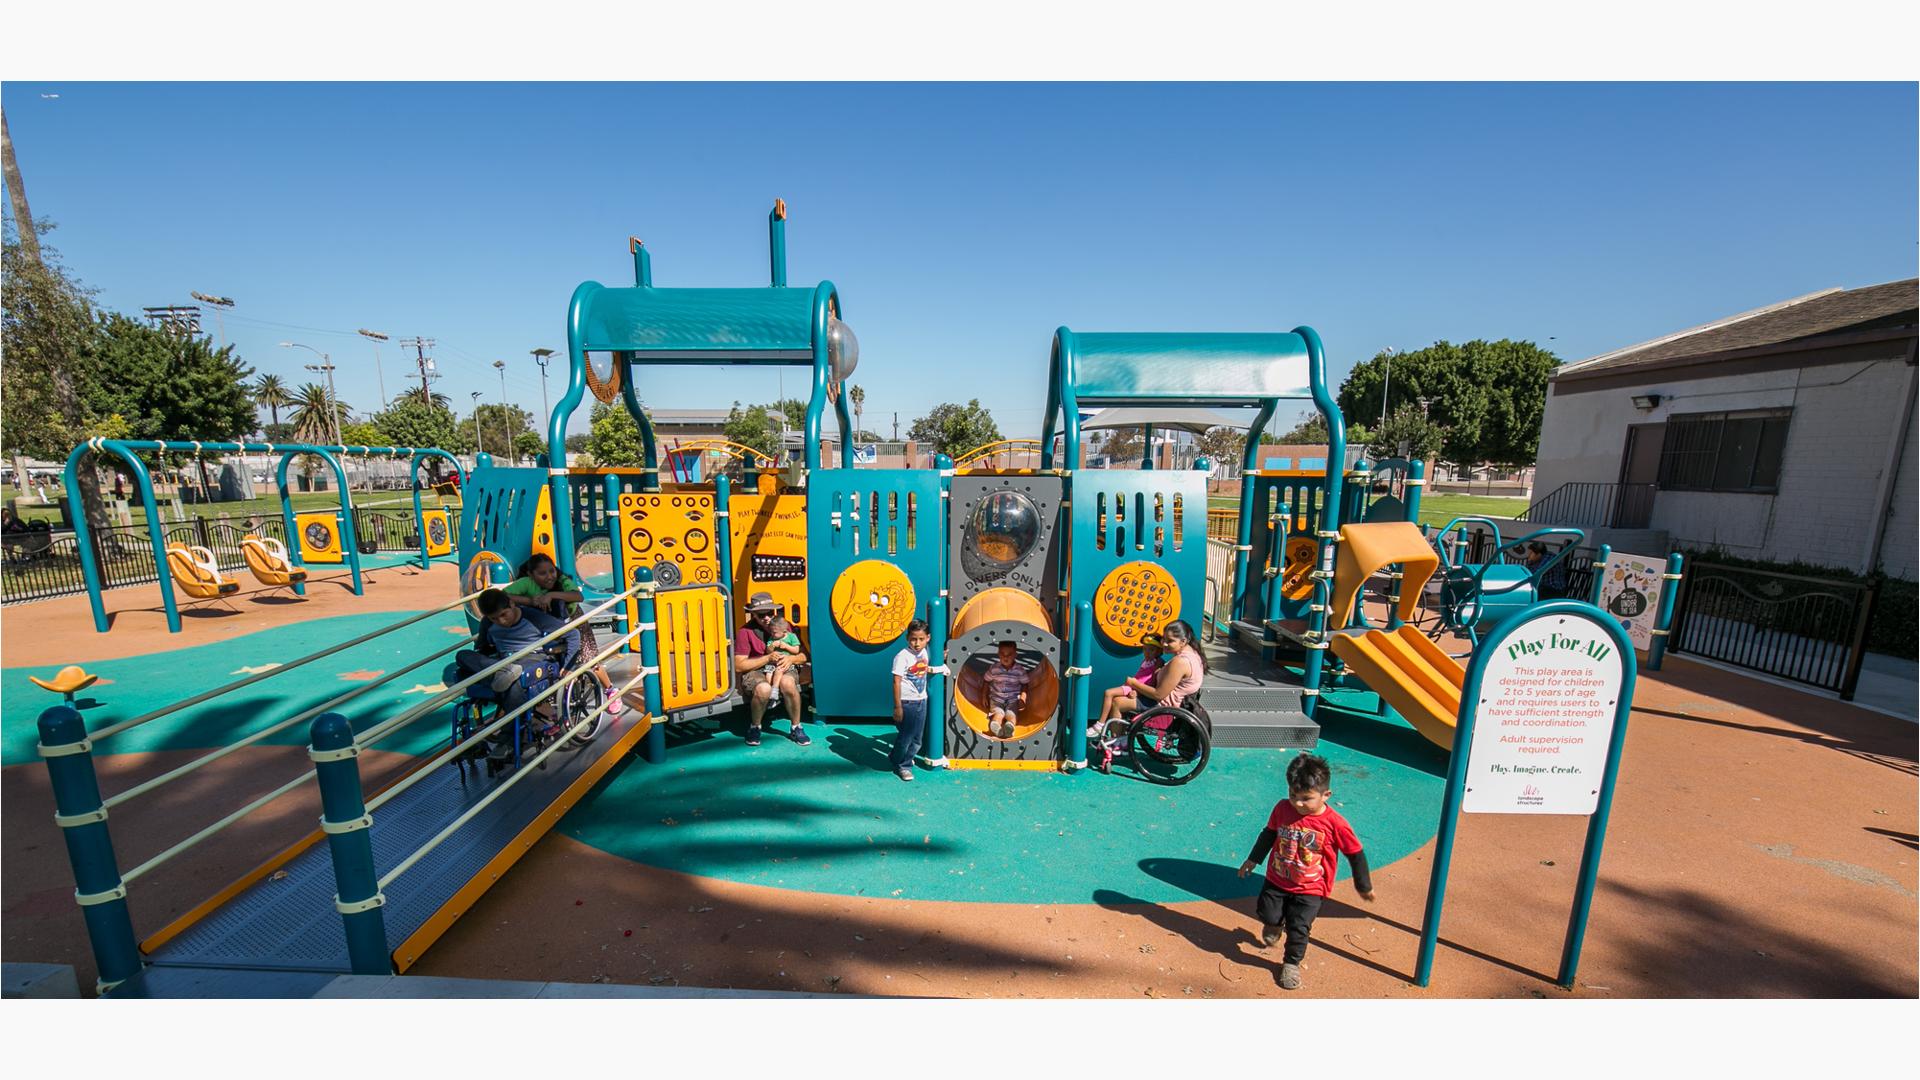 small kids run and play around a teal and orange ramped playground with surfacing. Swings and a building are in the background of a warm blue sky.